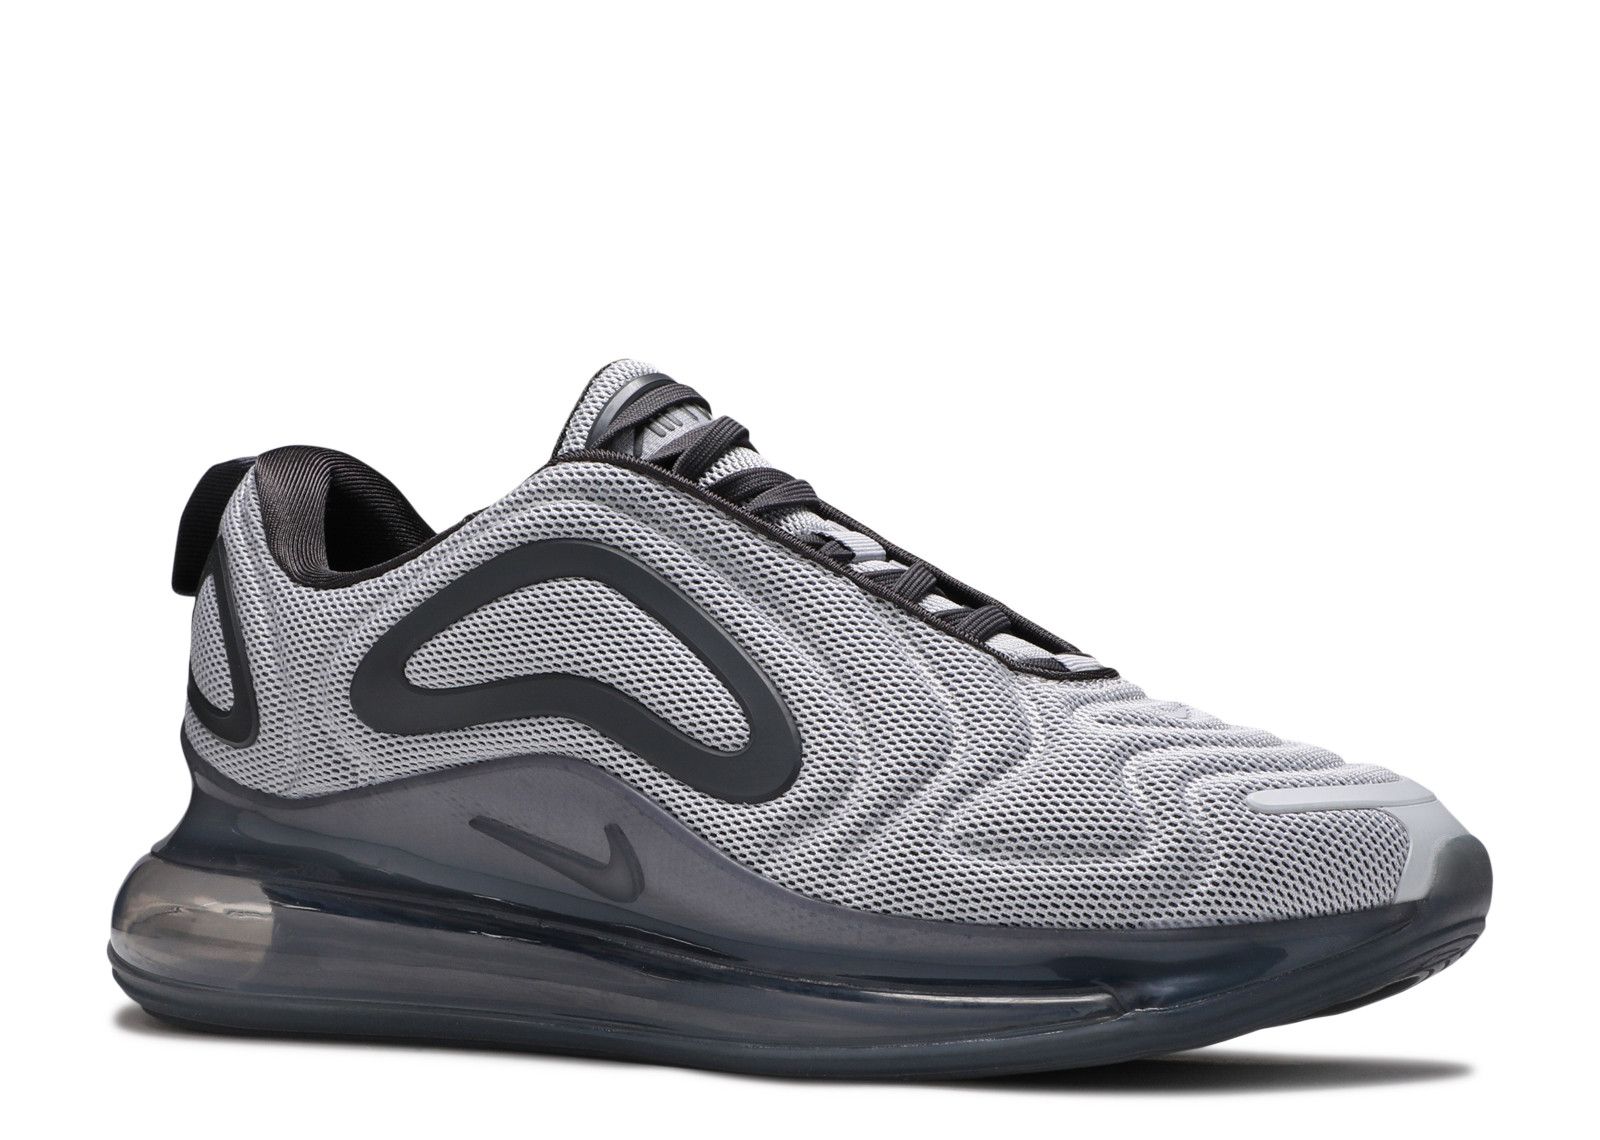 Air Max 720 'Wolf Grey' - Nike - AO2924 012 - wolf grey/anthracite ...